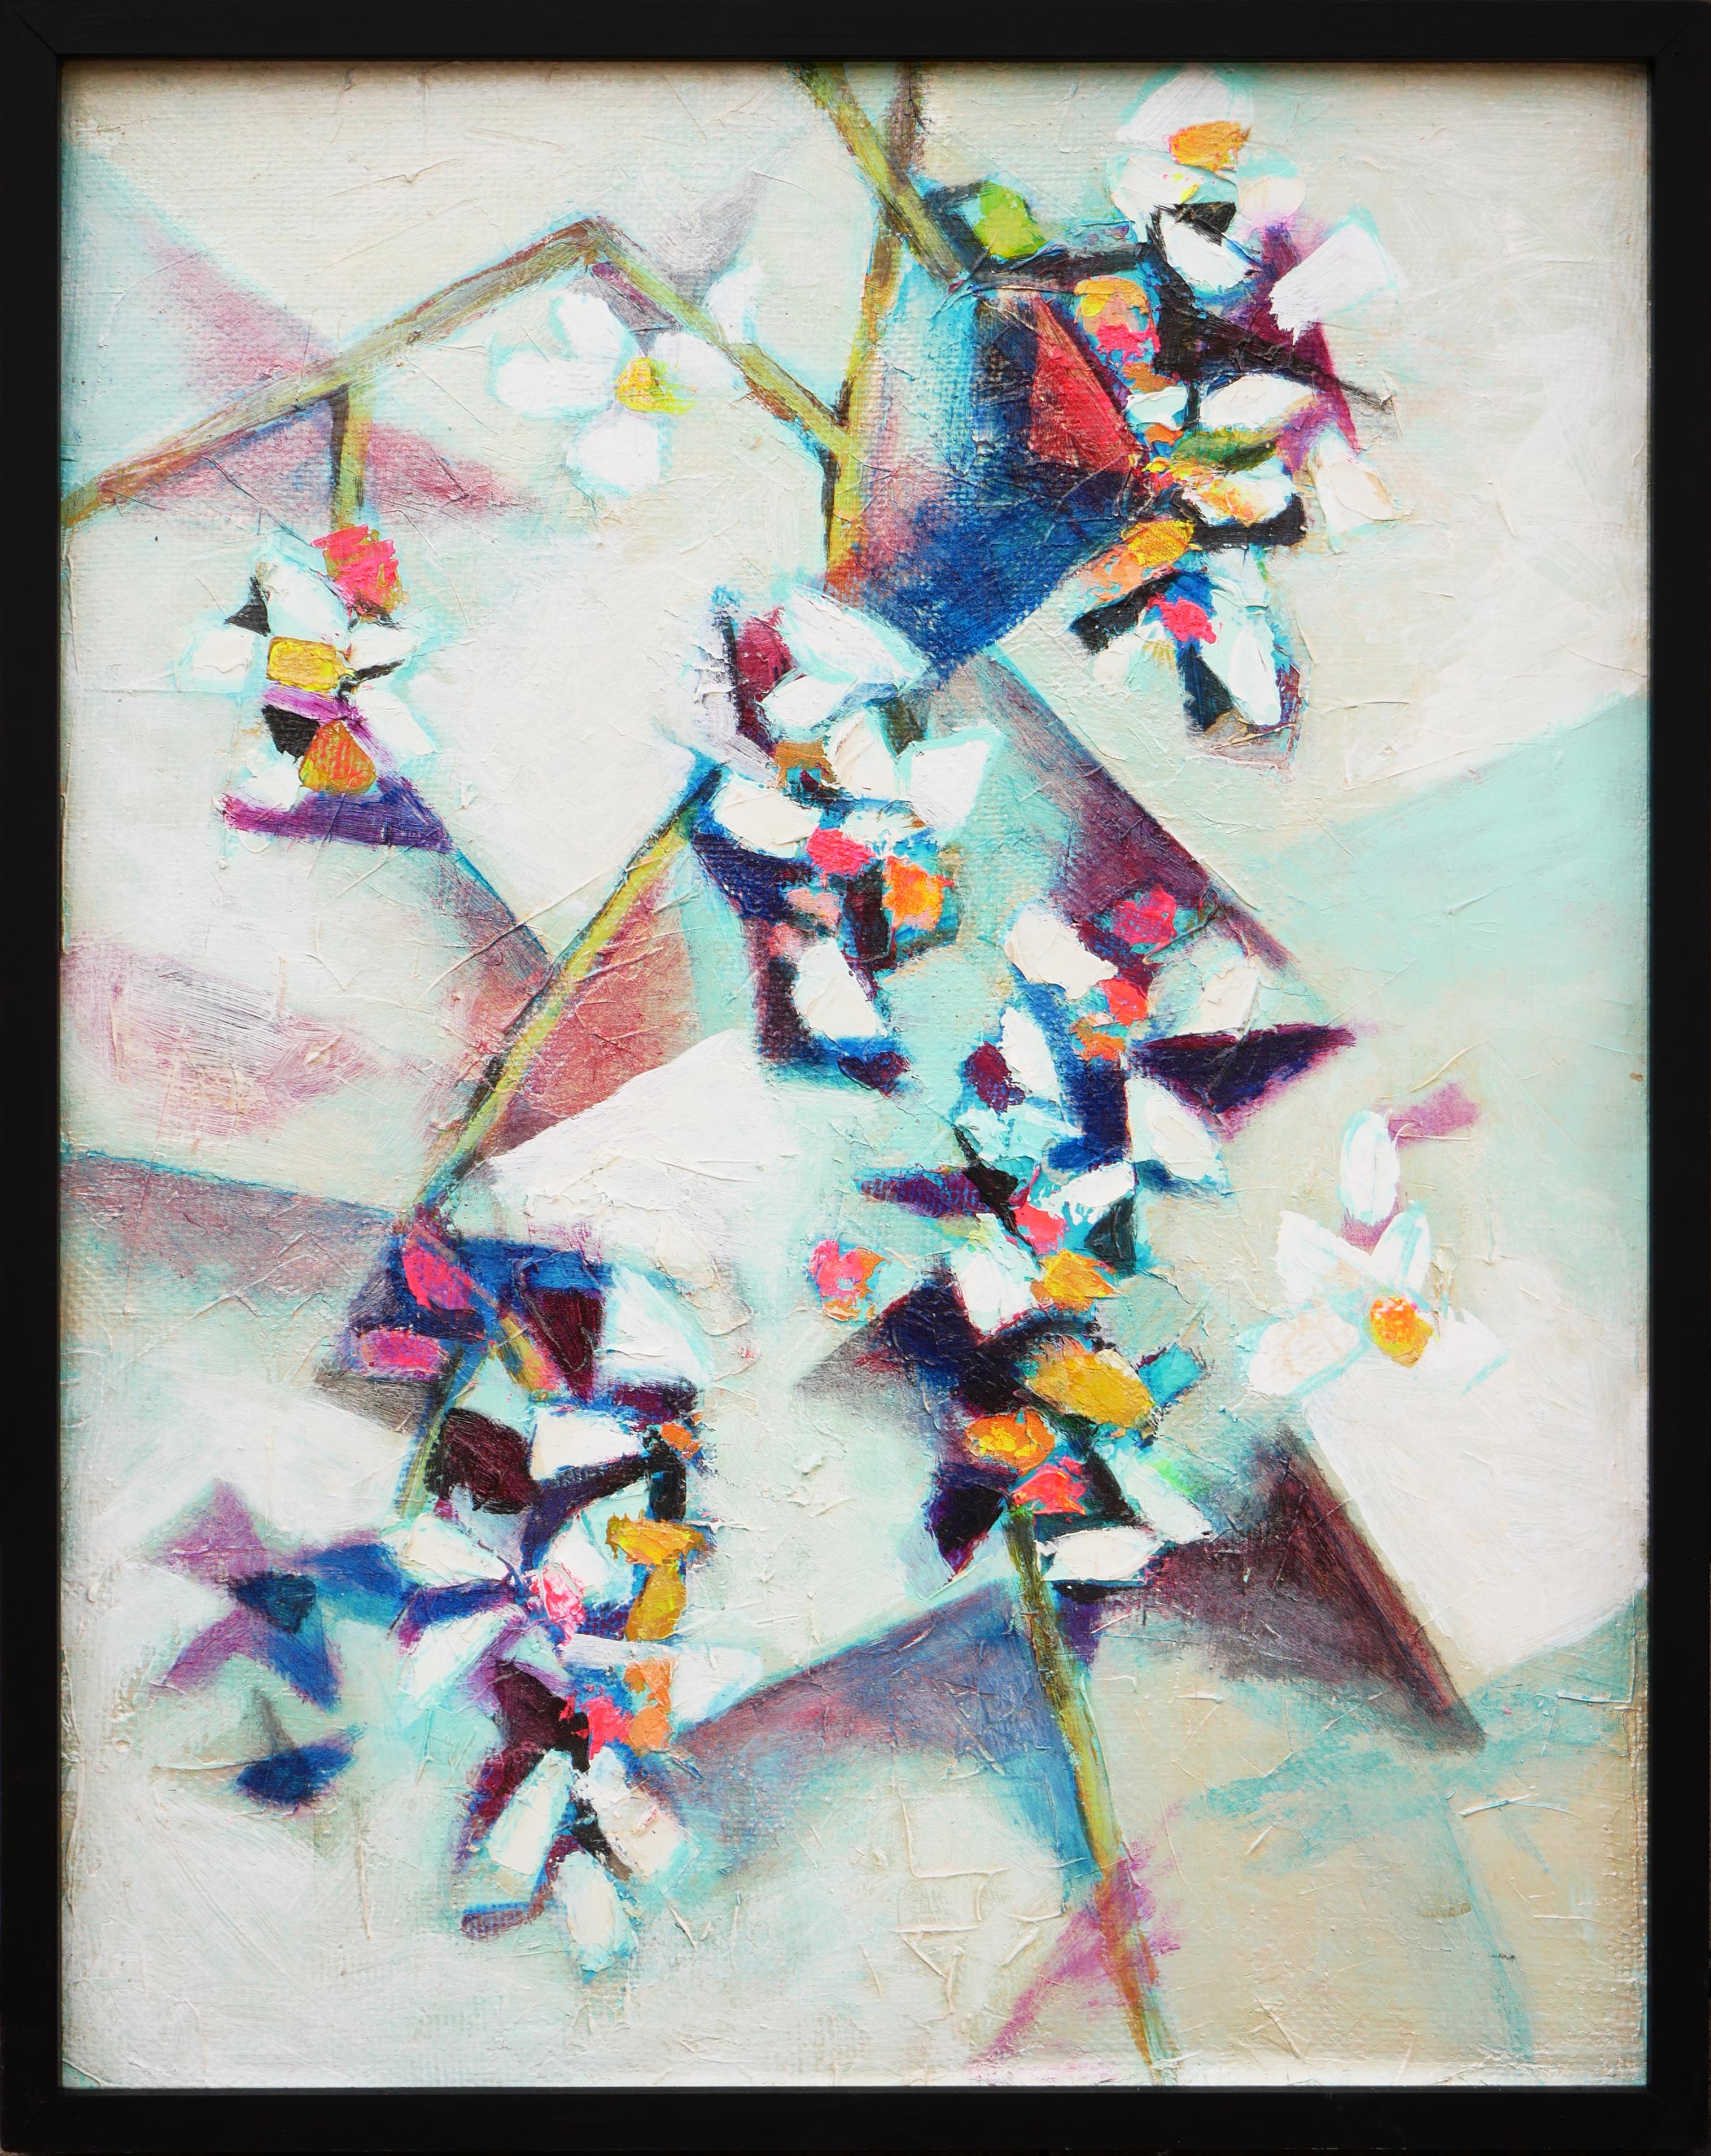 David Adickes Abstract Painting - "White Flowers Cubist" Pastel-Toned Abstract Still Life Painting